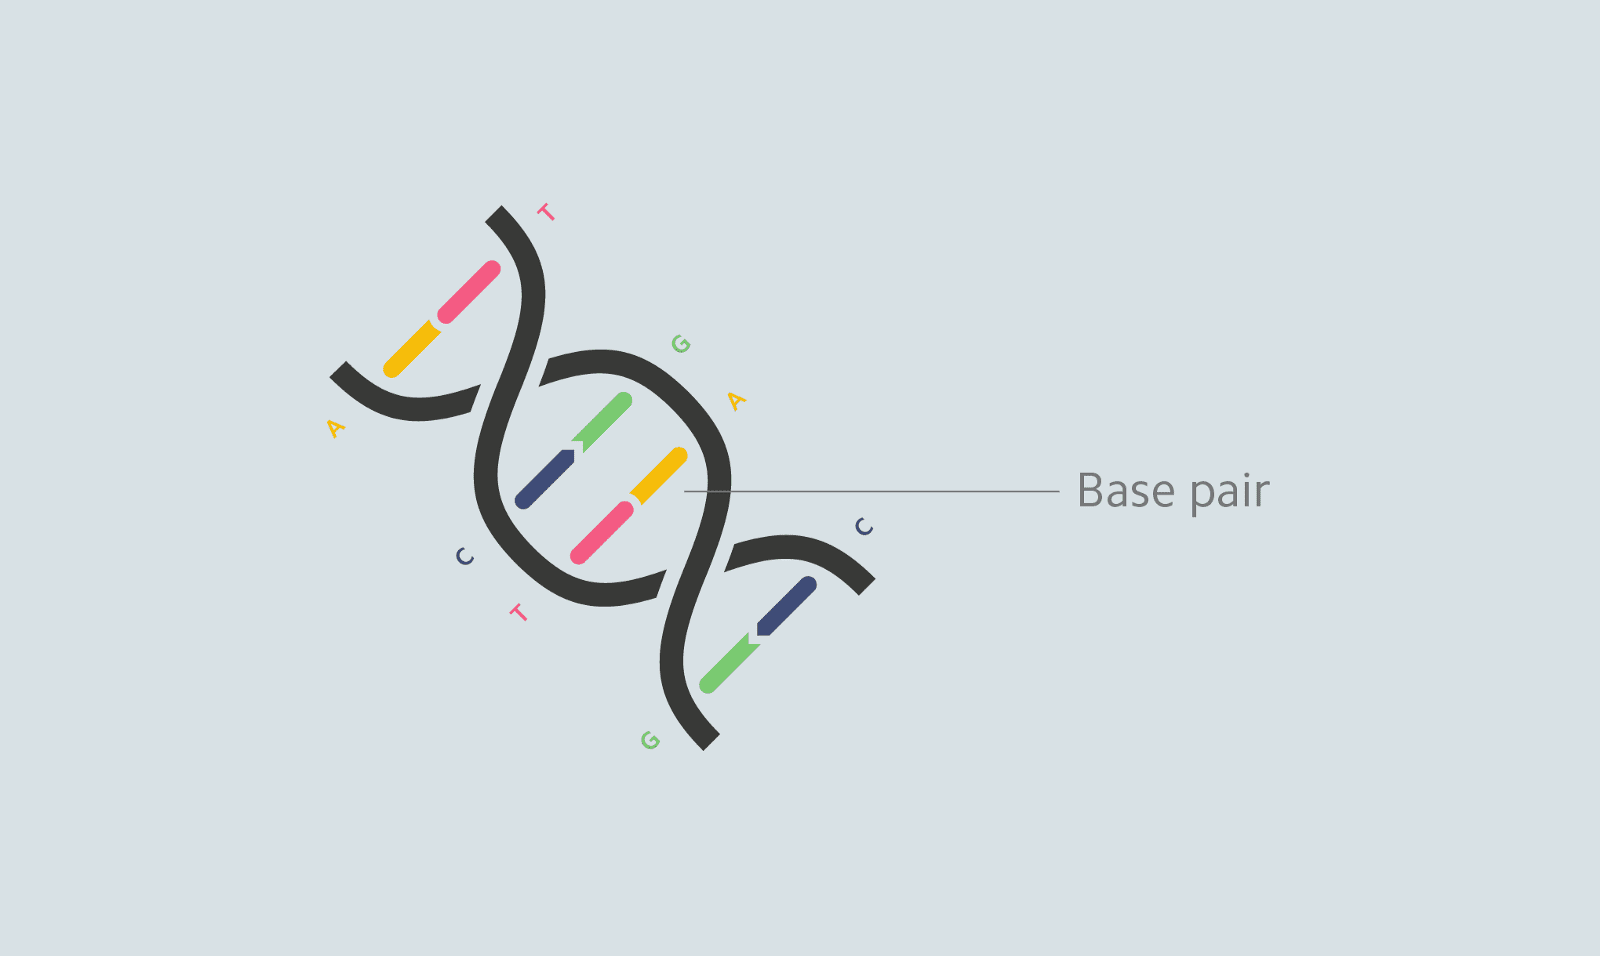 Definition of base pair - NCI Dictionary of Genetics Terms - NCI